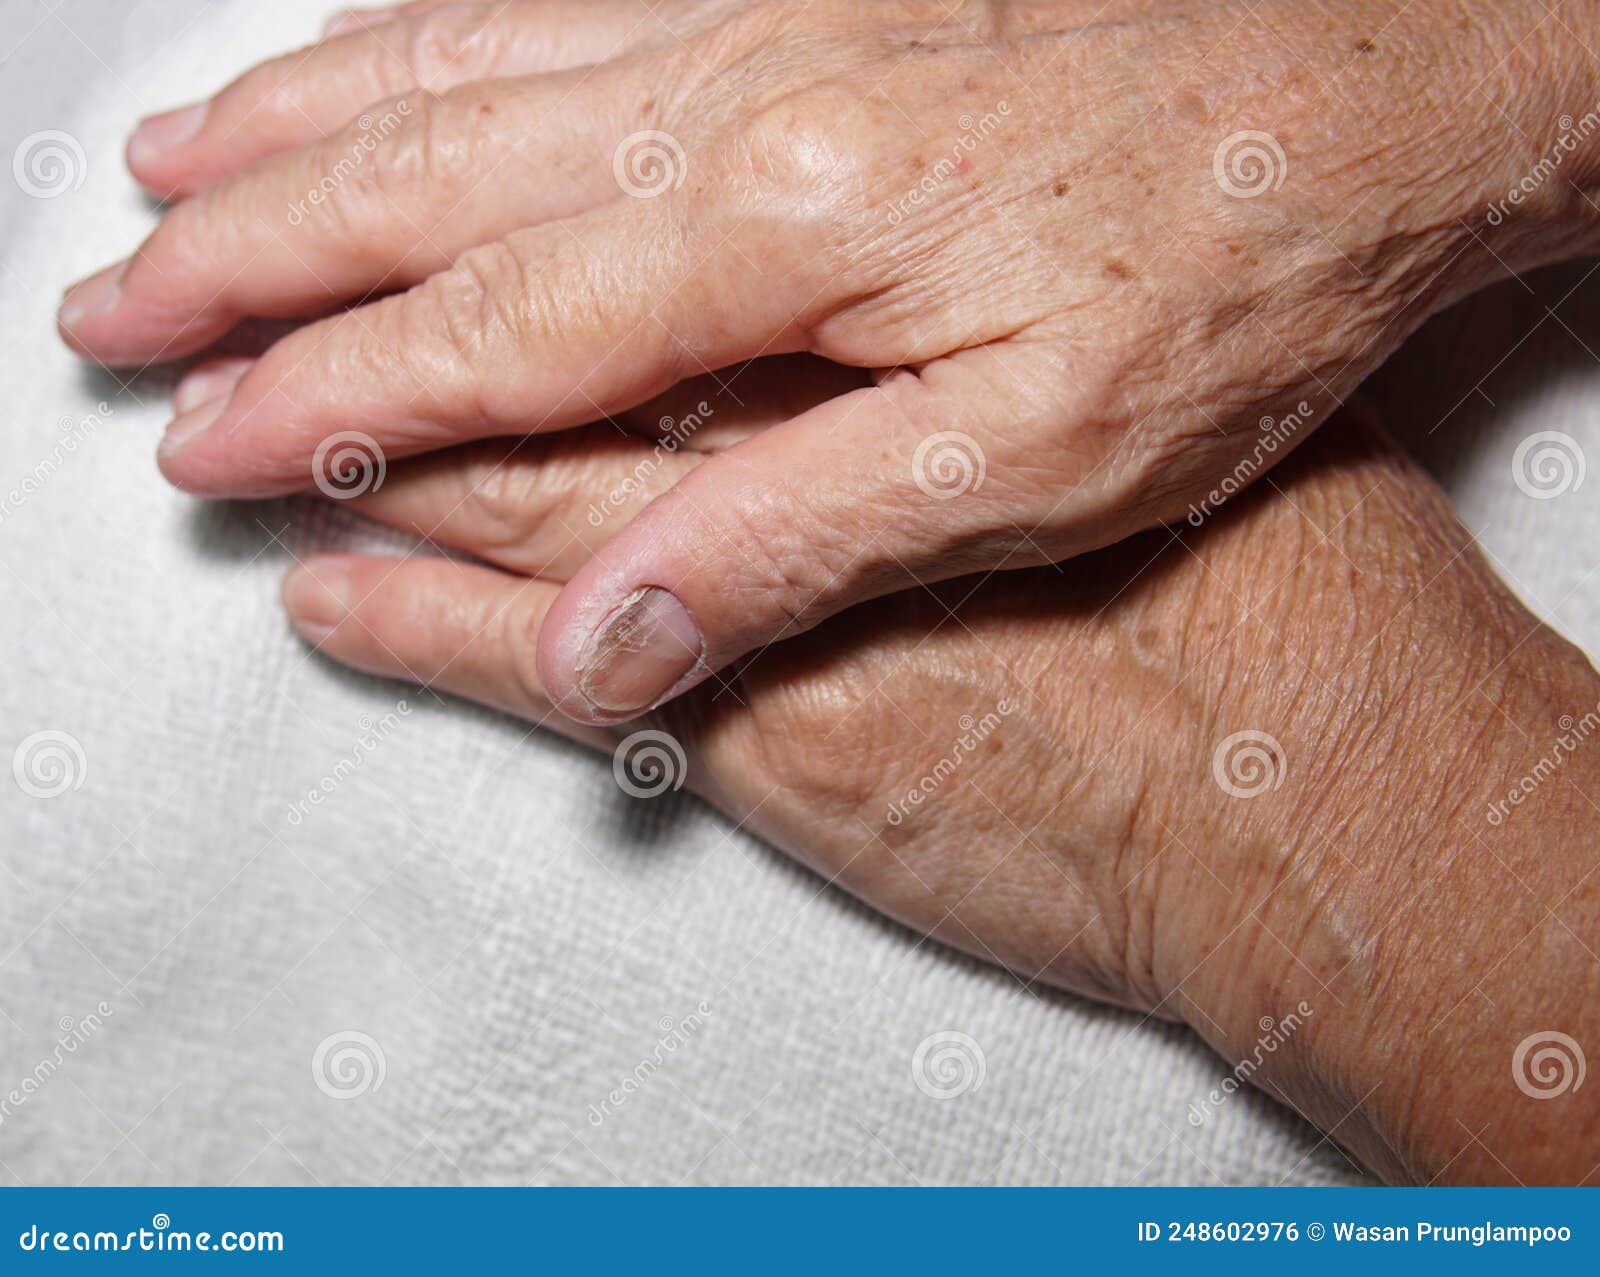 Asian Man Scratching His Hand. Concept of Itchy Skin Diseases Such As  Scabies, Fungal Infection, Eczema, Psoriasis, Allergy, Etc Stock Photo -  Image of irritation, fungus: 251058014